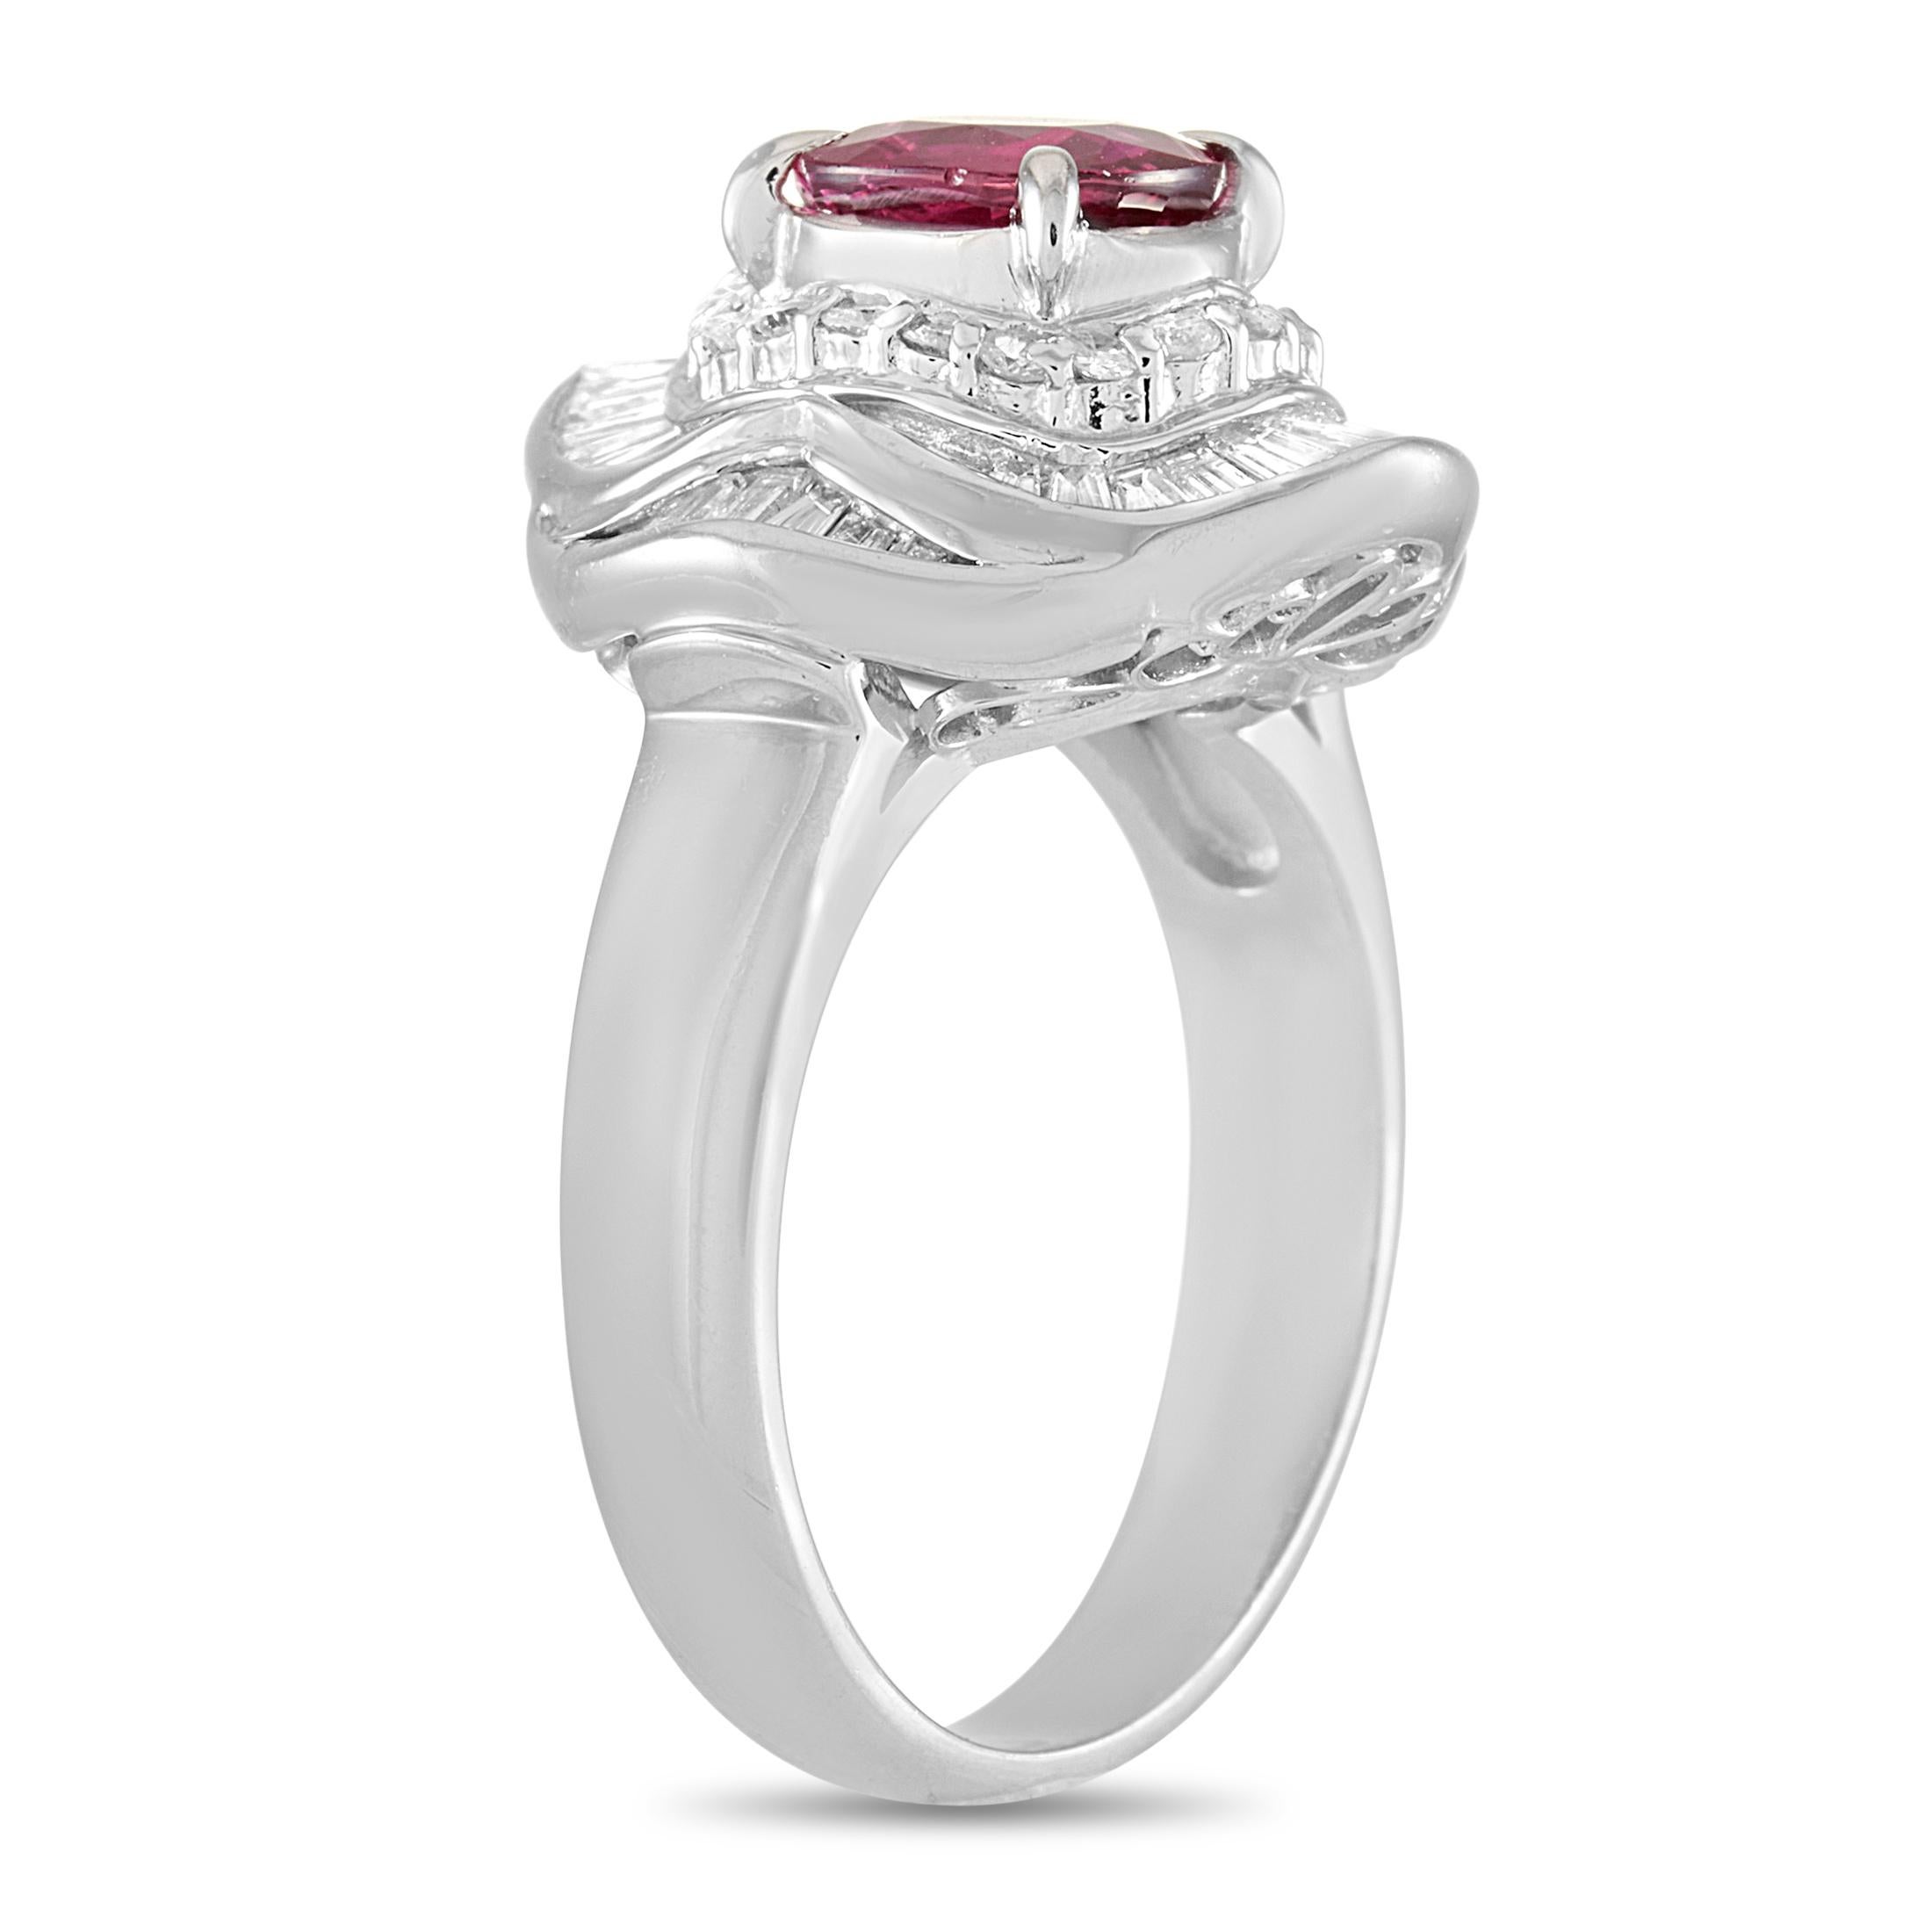 This LB Exclusive ring is crafted from platinum and weighs 12 grams. It boasts band thickness of 4 mm and top height of 9 mm, while top dimensions measure 17 by 16 mm. The ring is set with a 1.68 ct ruby and a total of 1.15 carats of diamonds.
